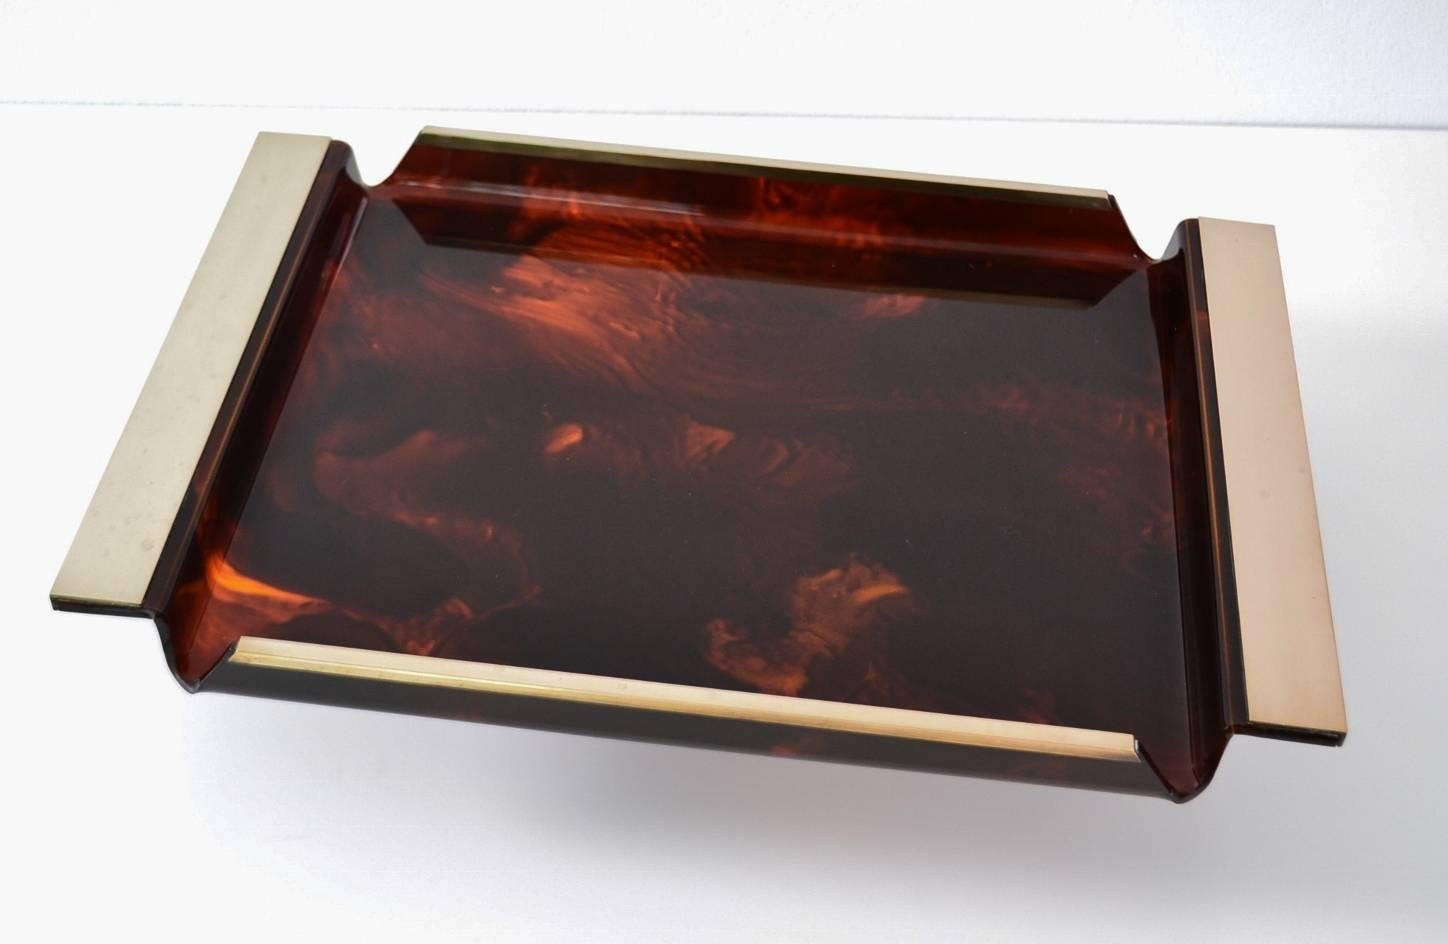 Hollywood Regency Faux Tortoiseshell Serving Tray Lucite and Brass, Italy, 1970s